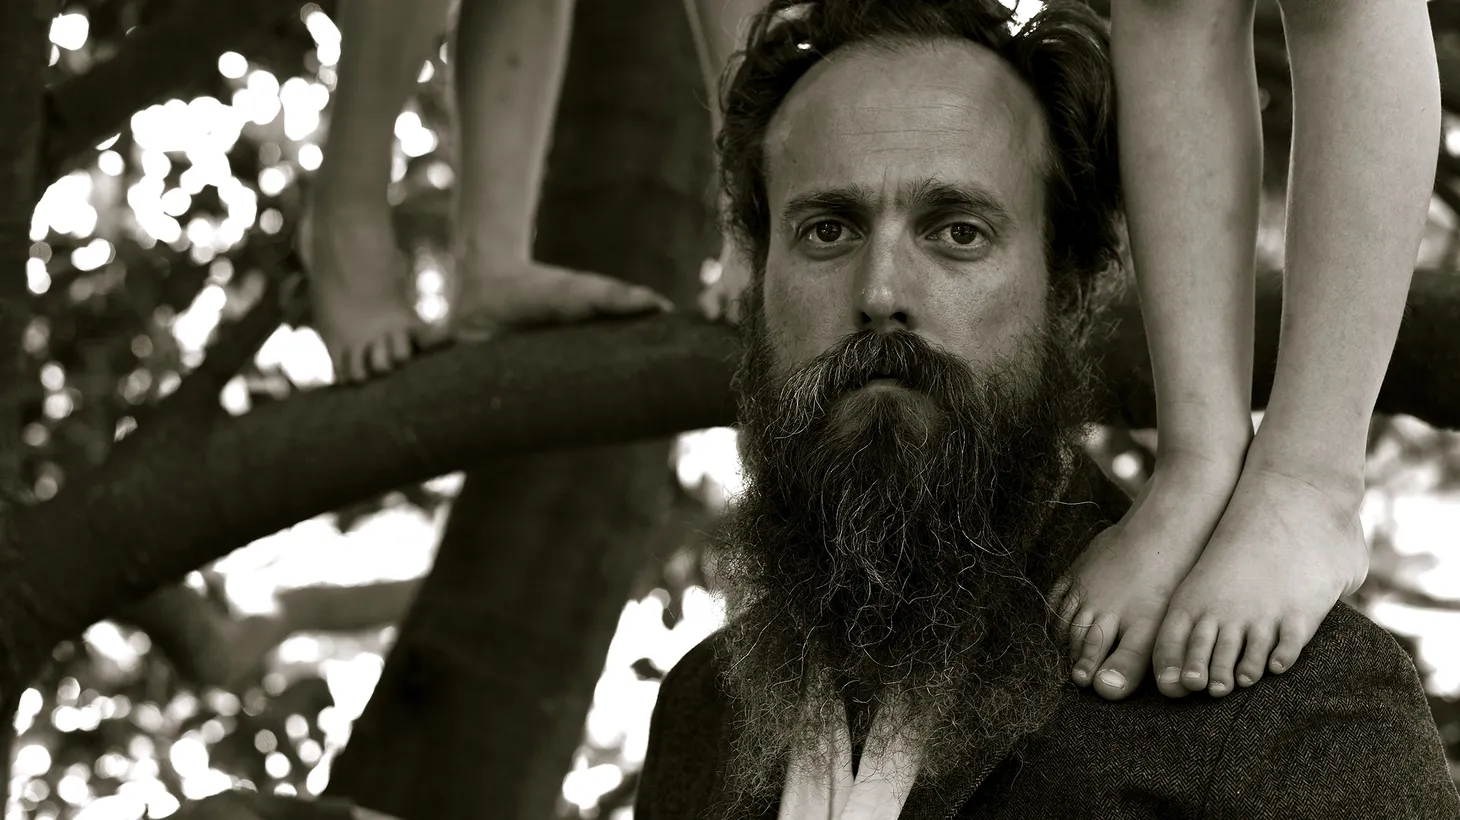 Beast Epic is the sixth album from Sam Beam under the moniker Iron & Wine. Everything was recorded live with minimal overdubbing, giving the songs a distinct vulnerability and, as always, honesty.